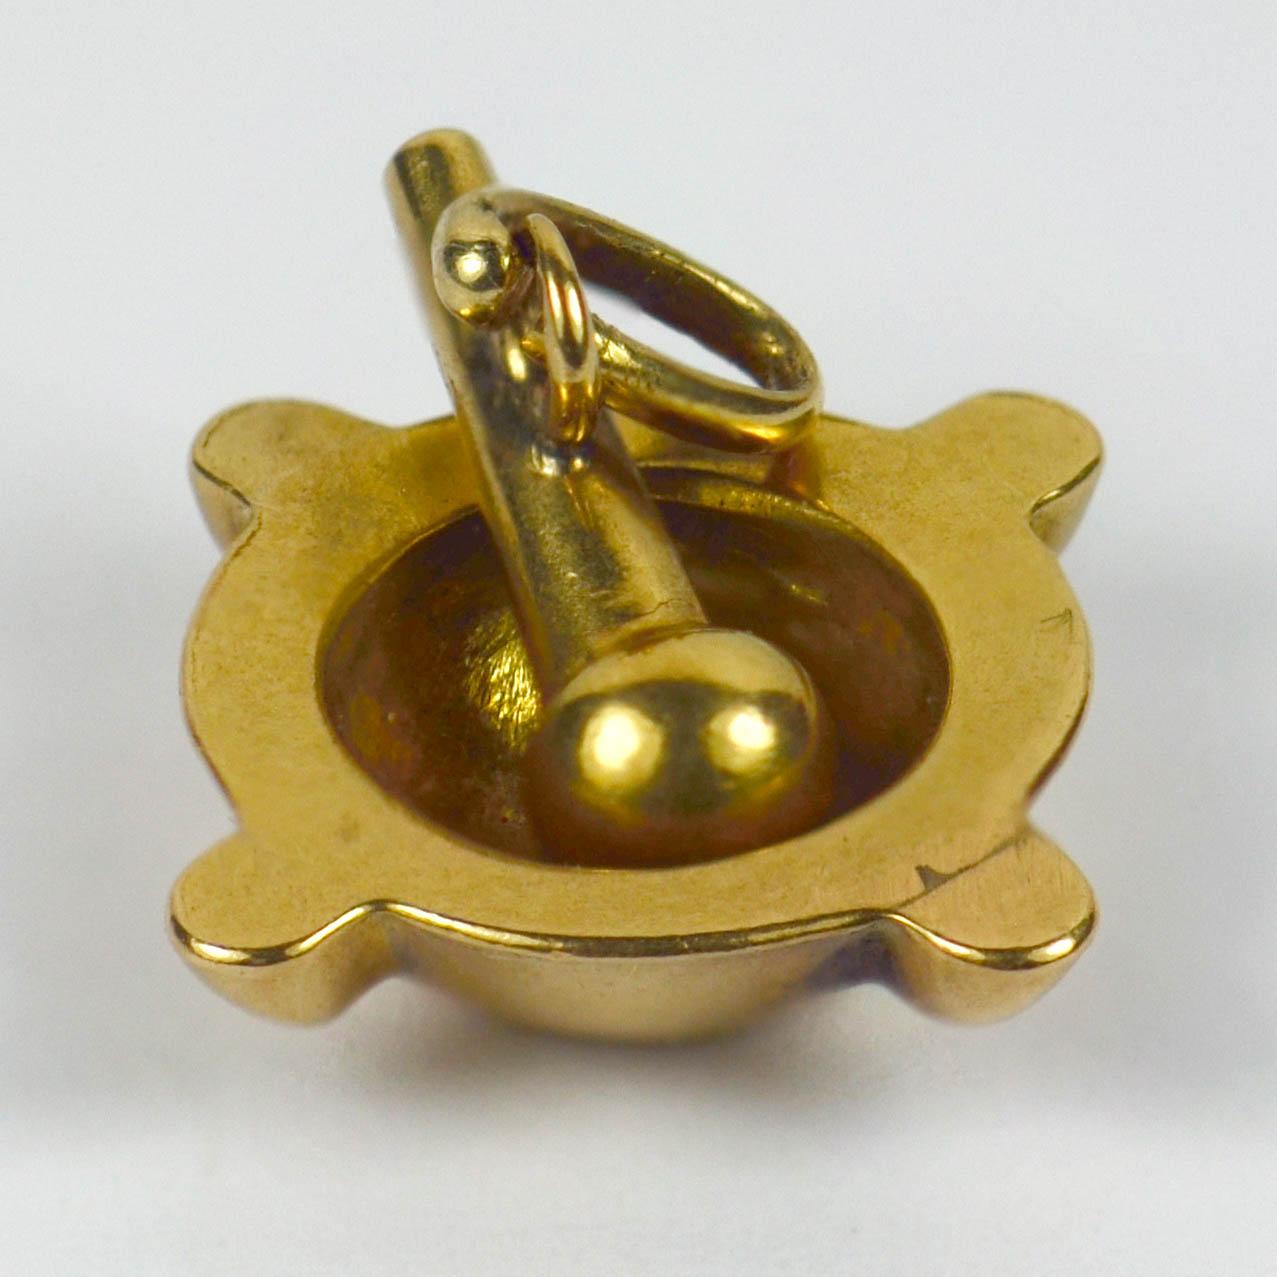 A French 18 karat yellow gold charm pendant designed as a pestle and mortar. Stamped with the eagle's head for 18 karat gold and French manufacture.

Dimensions: 1.5 x 1.5 x 0.7 cm
Weight: 2.62 grams